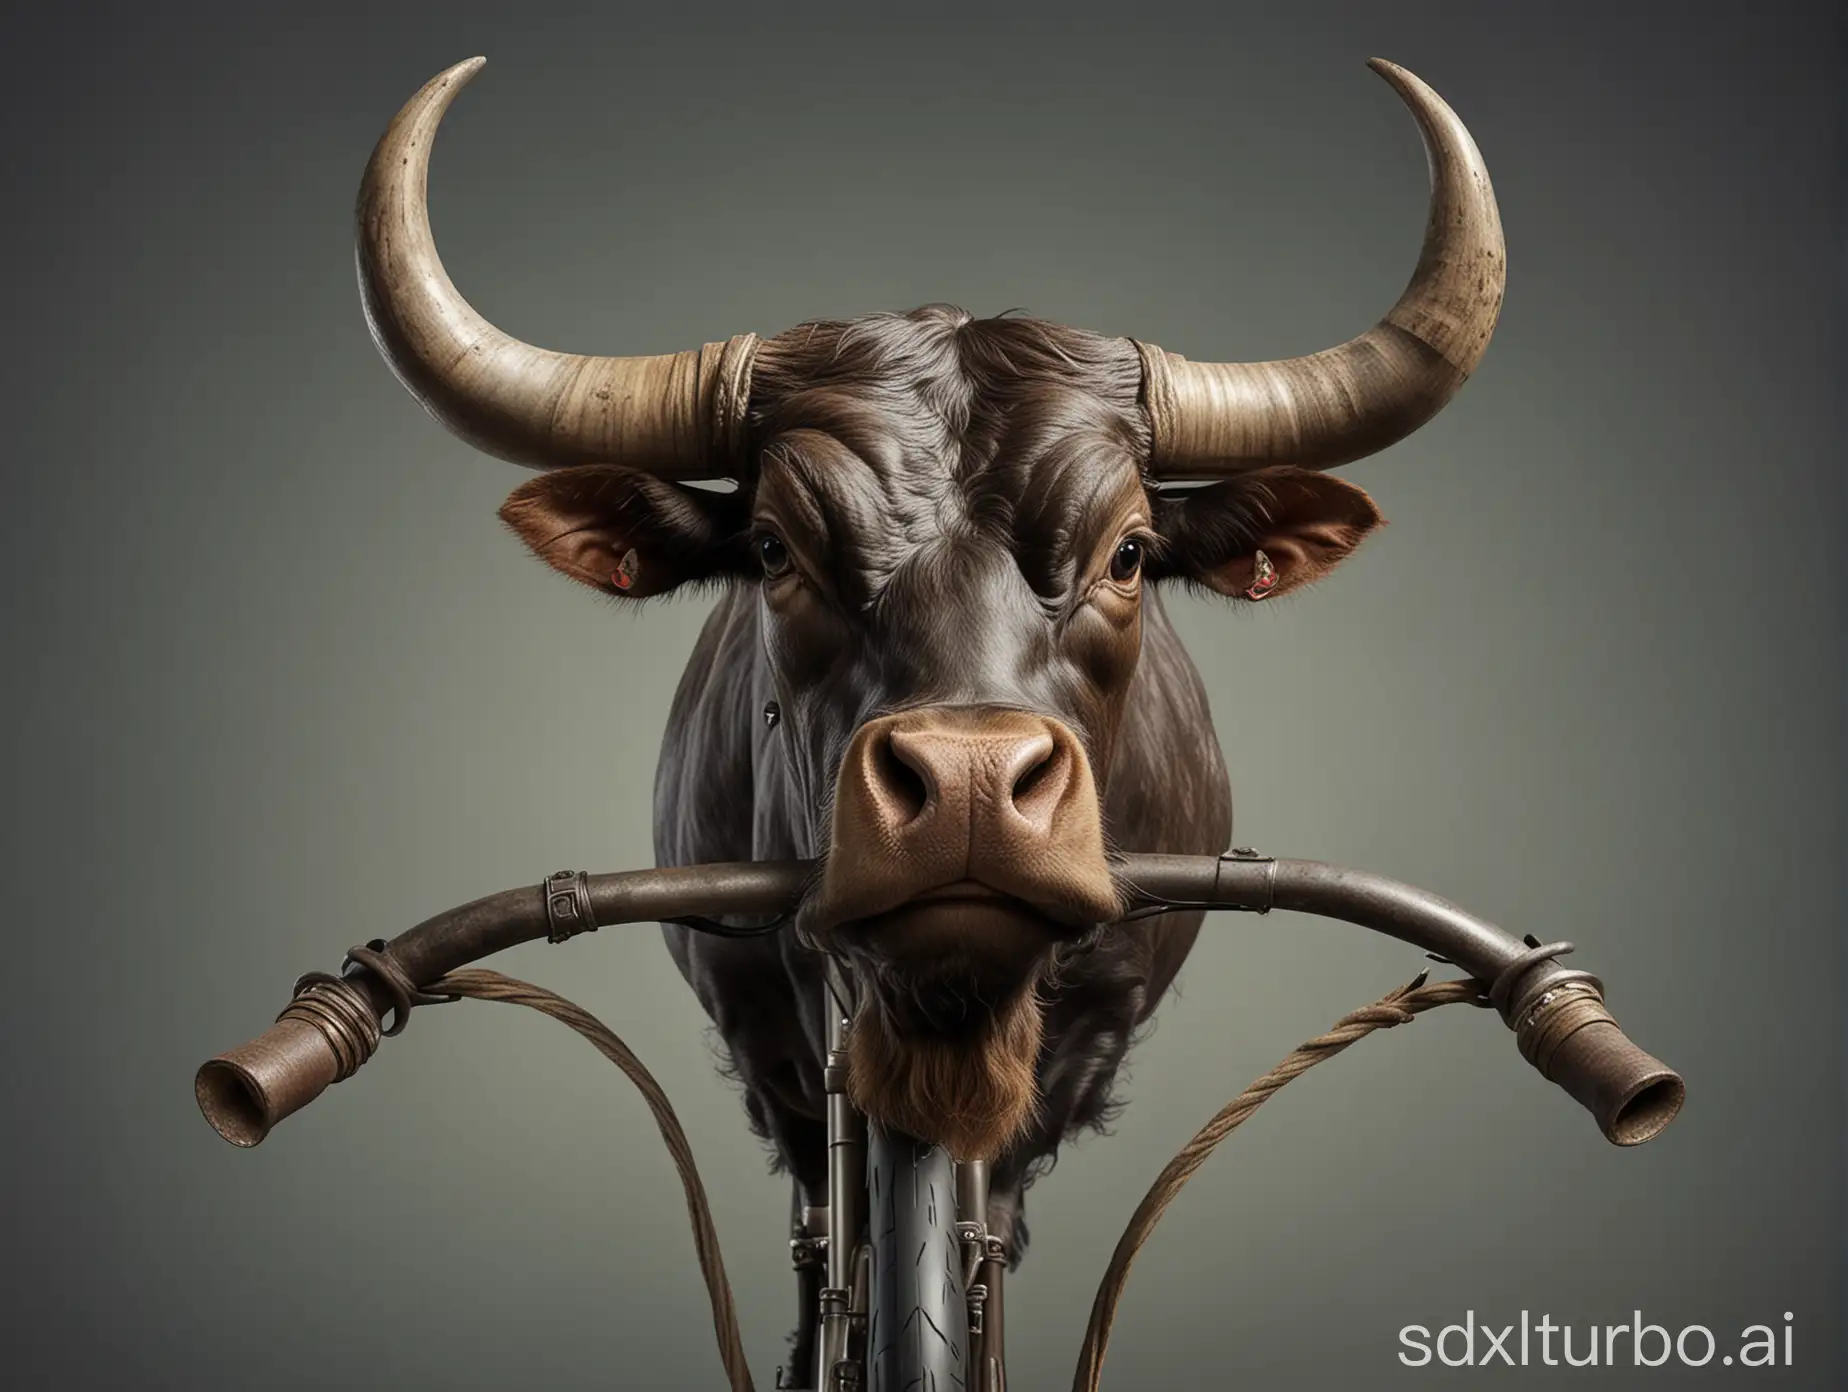 Bull with horns curved downwards in the shape of a bike racing handlebar